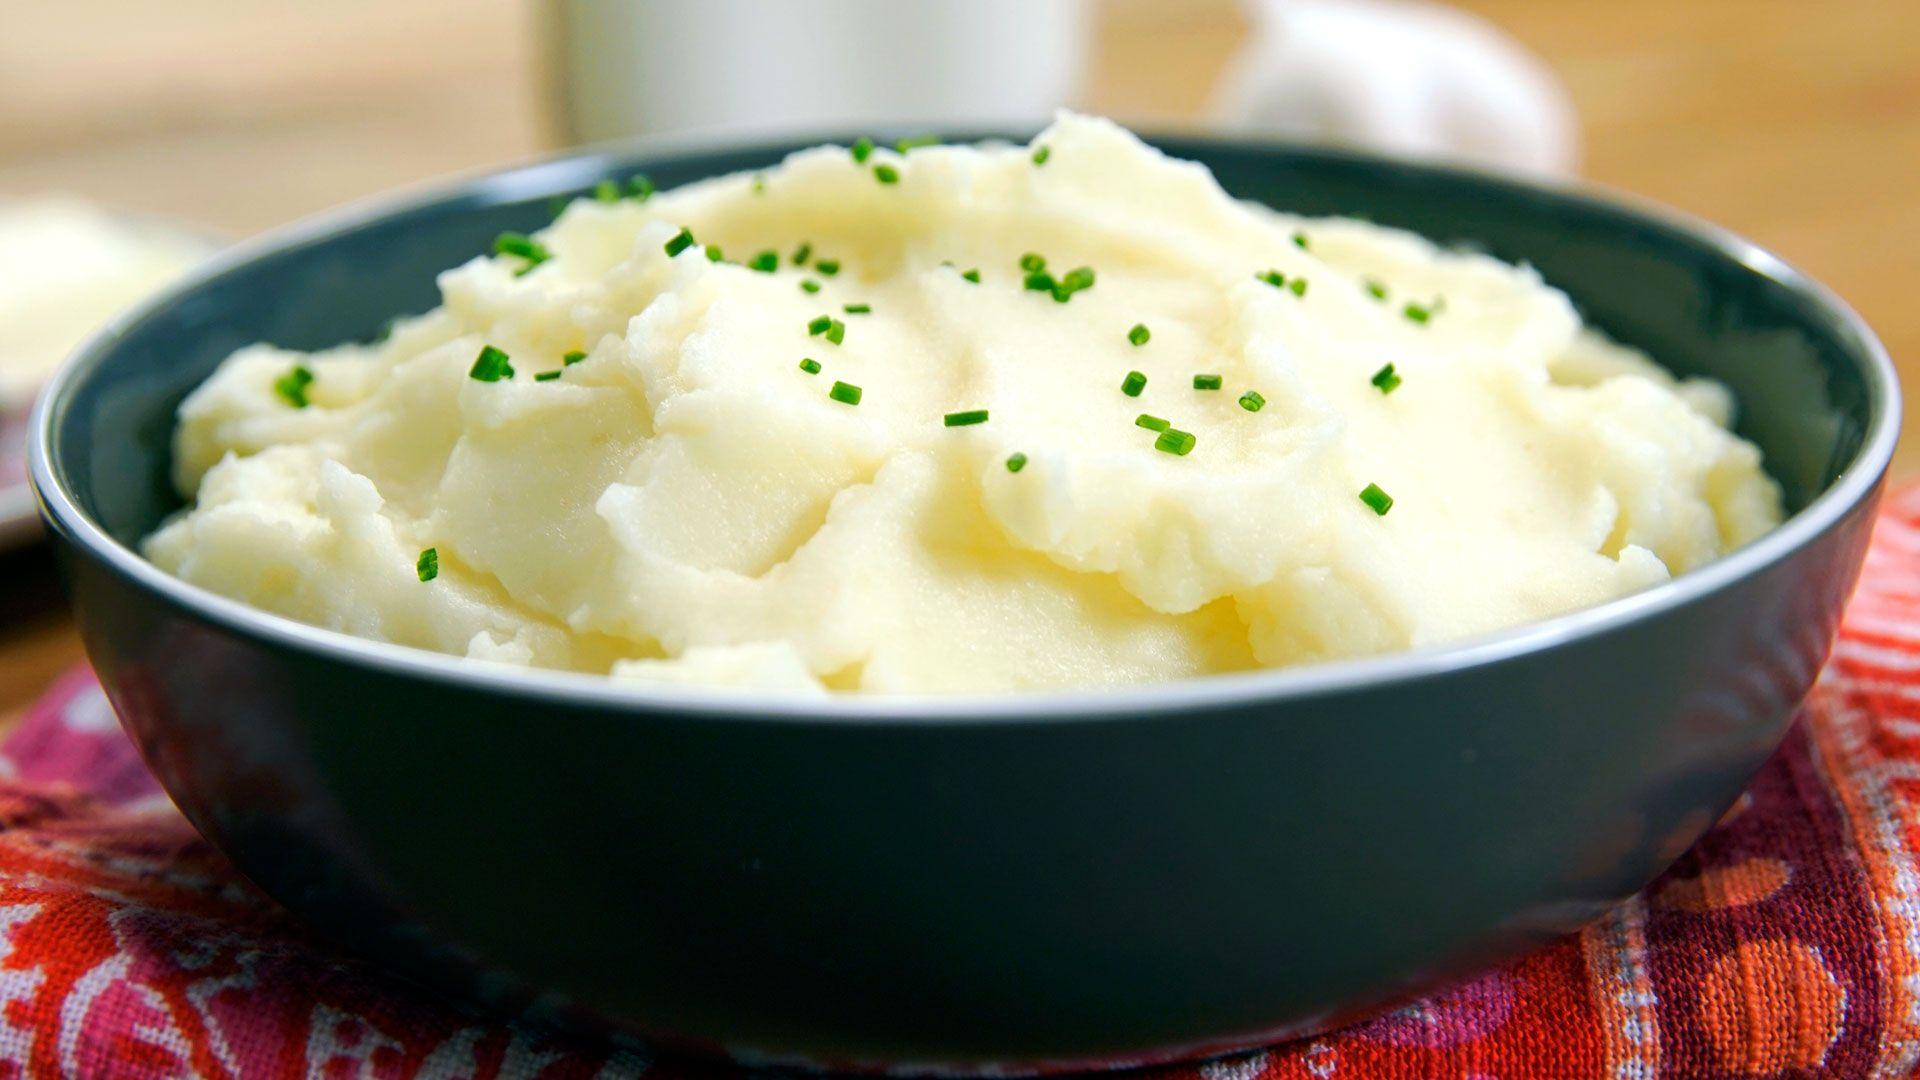 Mashed Potato Wallpapers - Wallpaper Cave